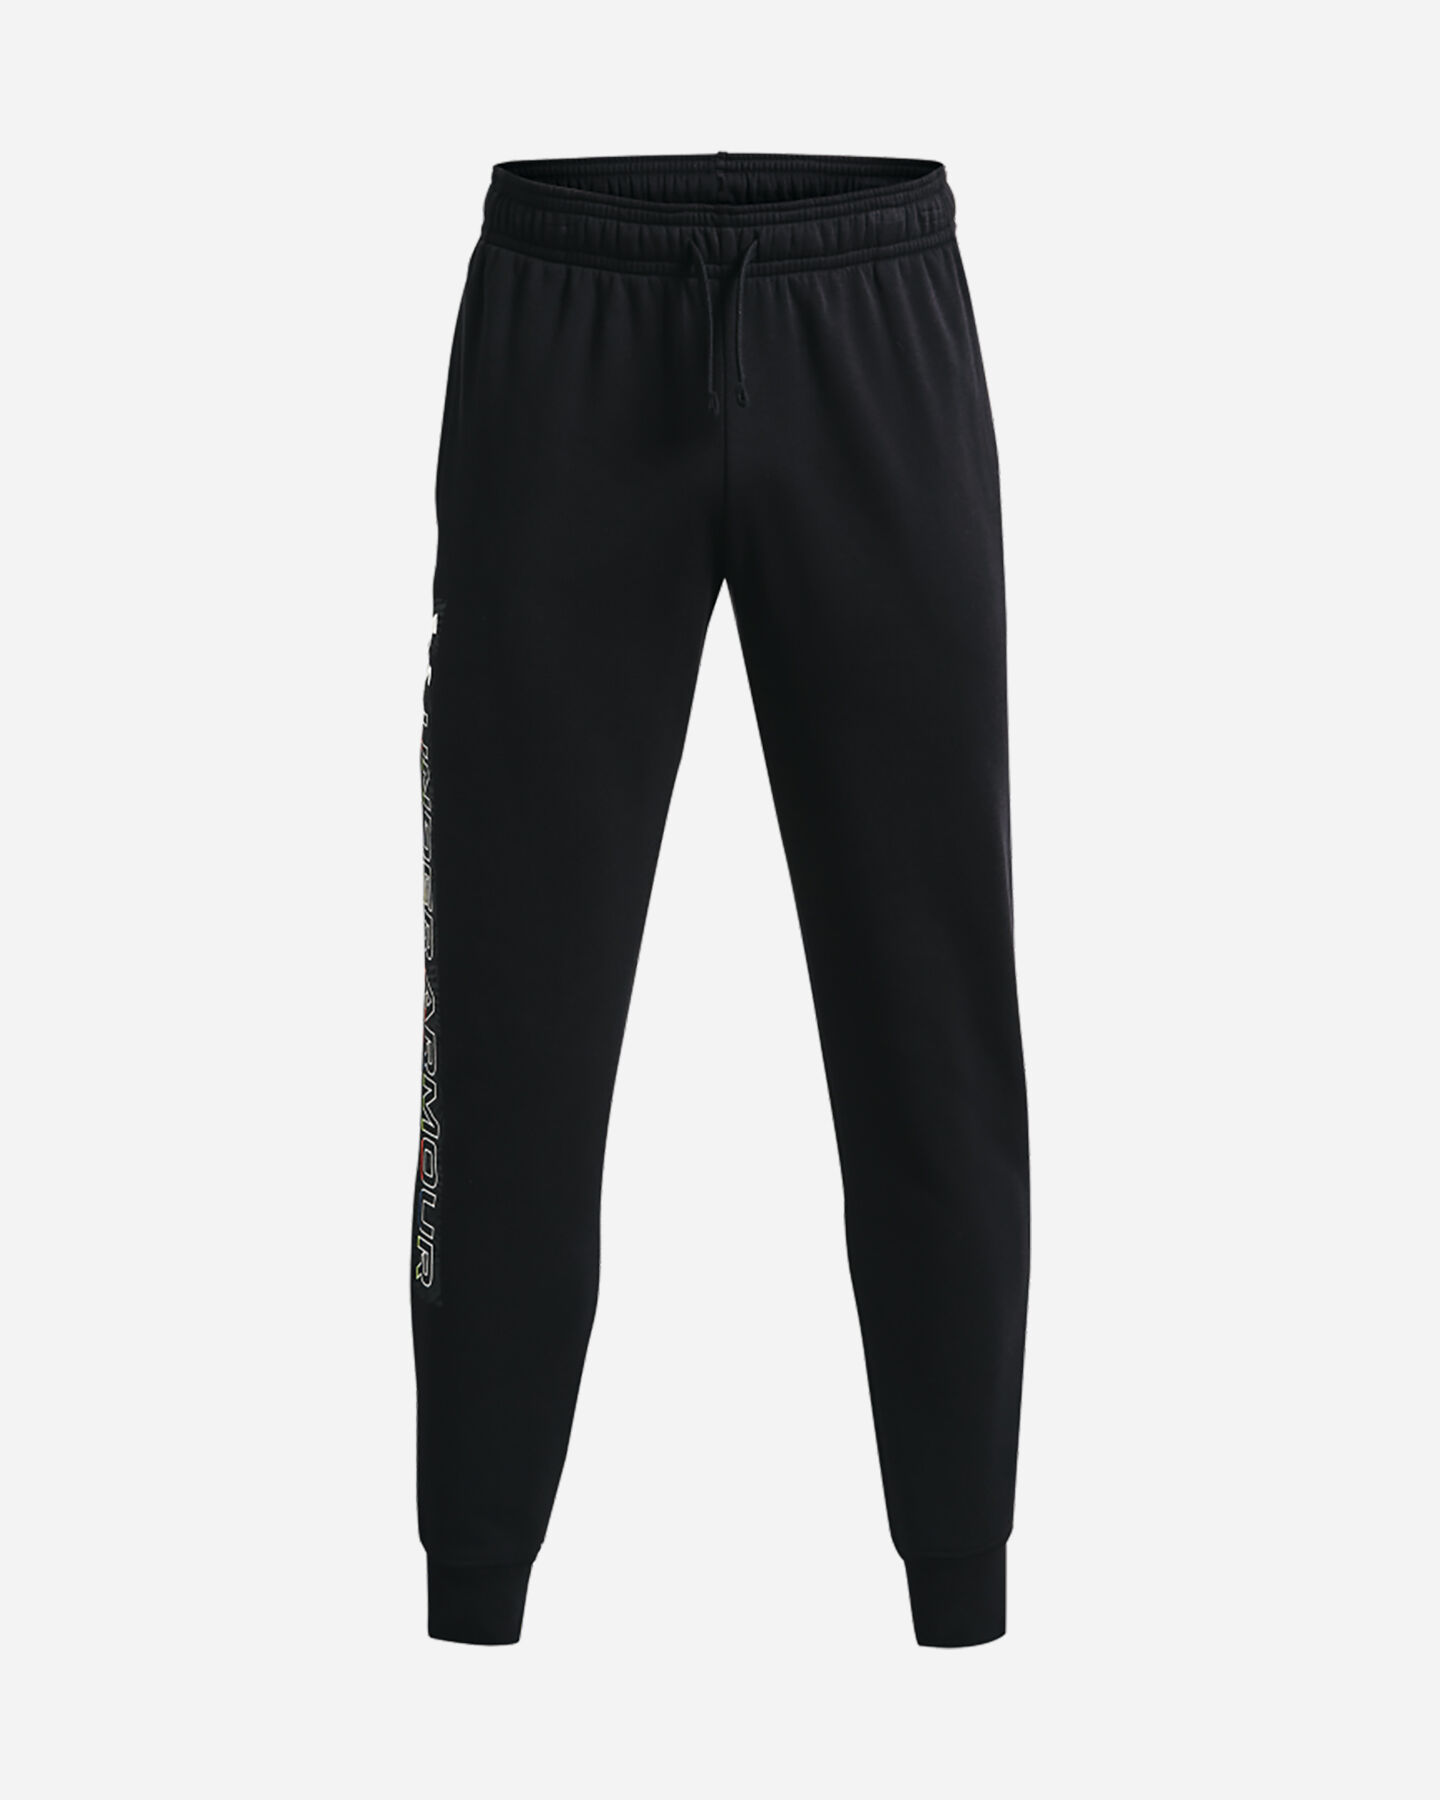  Pantalone UNDER ARMOUR A RIVAL LIGHT LOGO GRAPHIC M S5390471 scatto 0